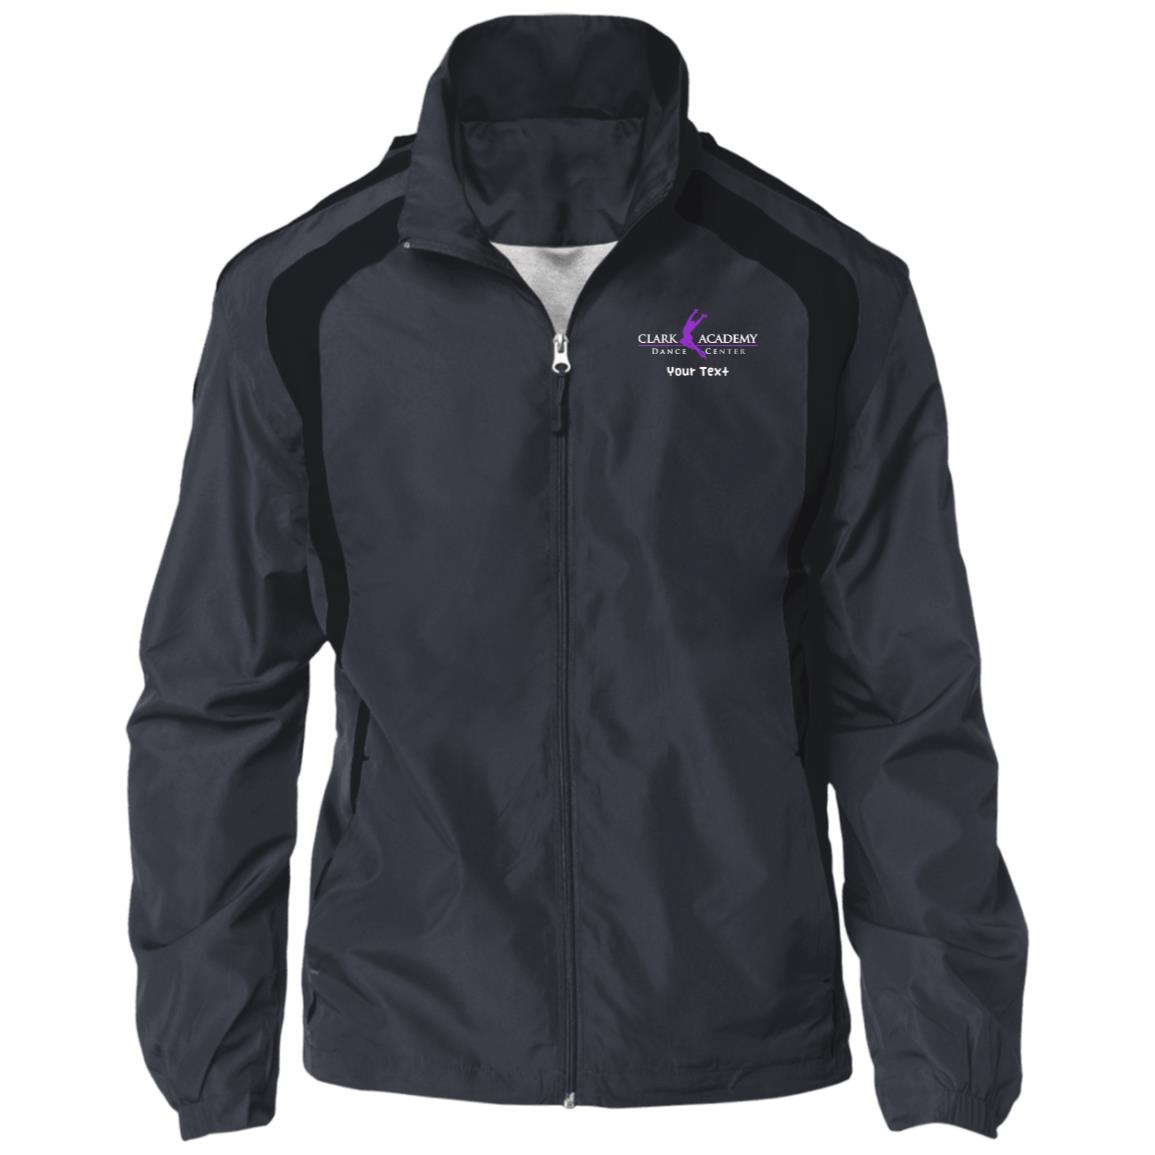 CADC Jersey-Lined Raglan Jacket - With FREE Personalization